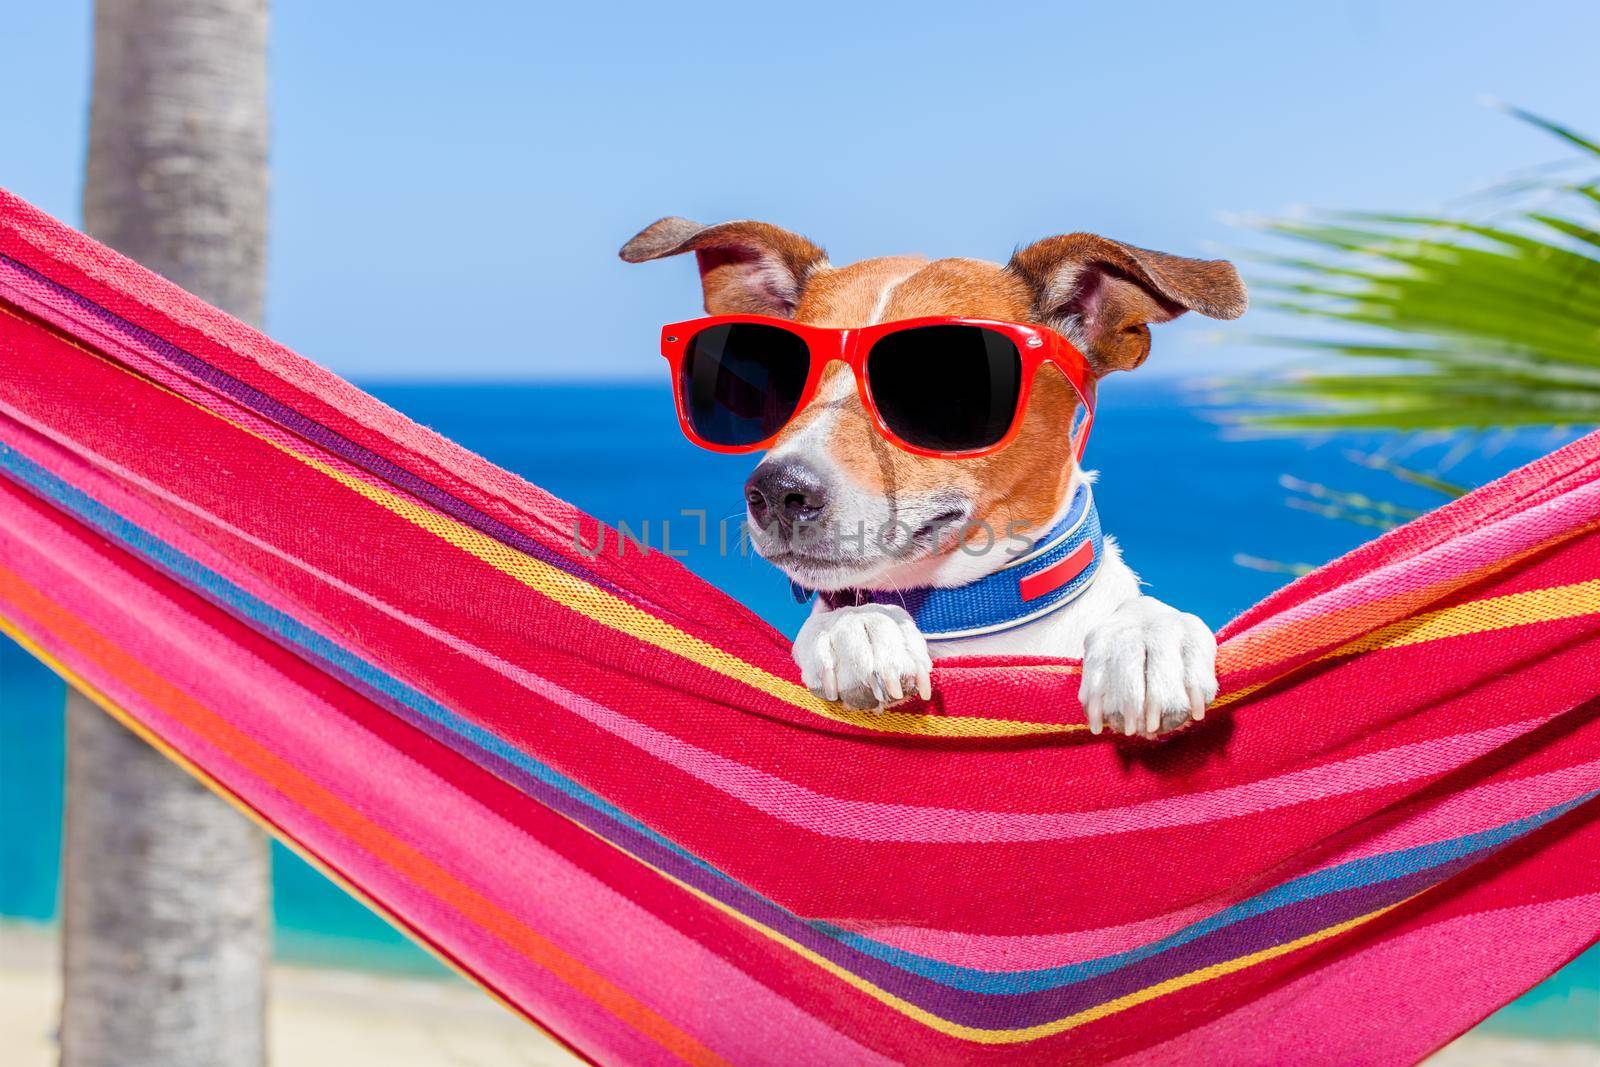 jack russell dog relaxing on a fancy red  hammock with sunglasses in summer vacation holidays at the beach under the palm tree